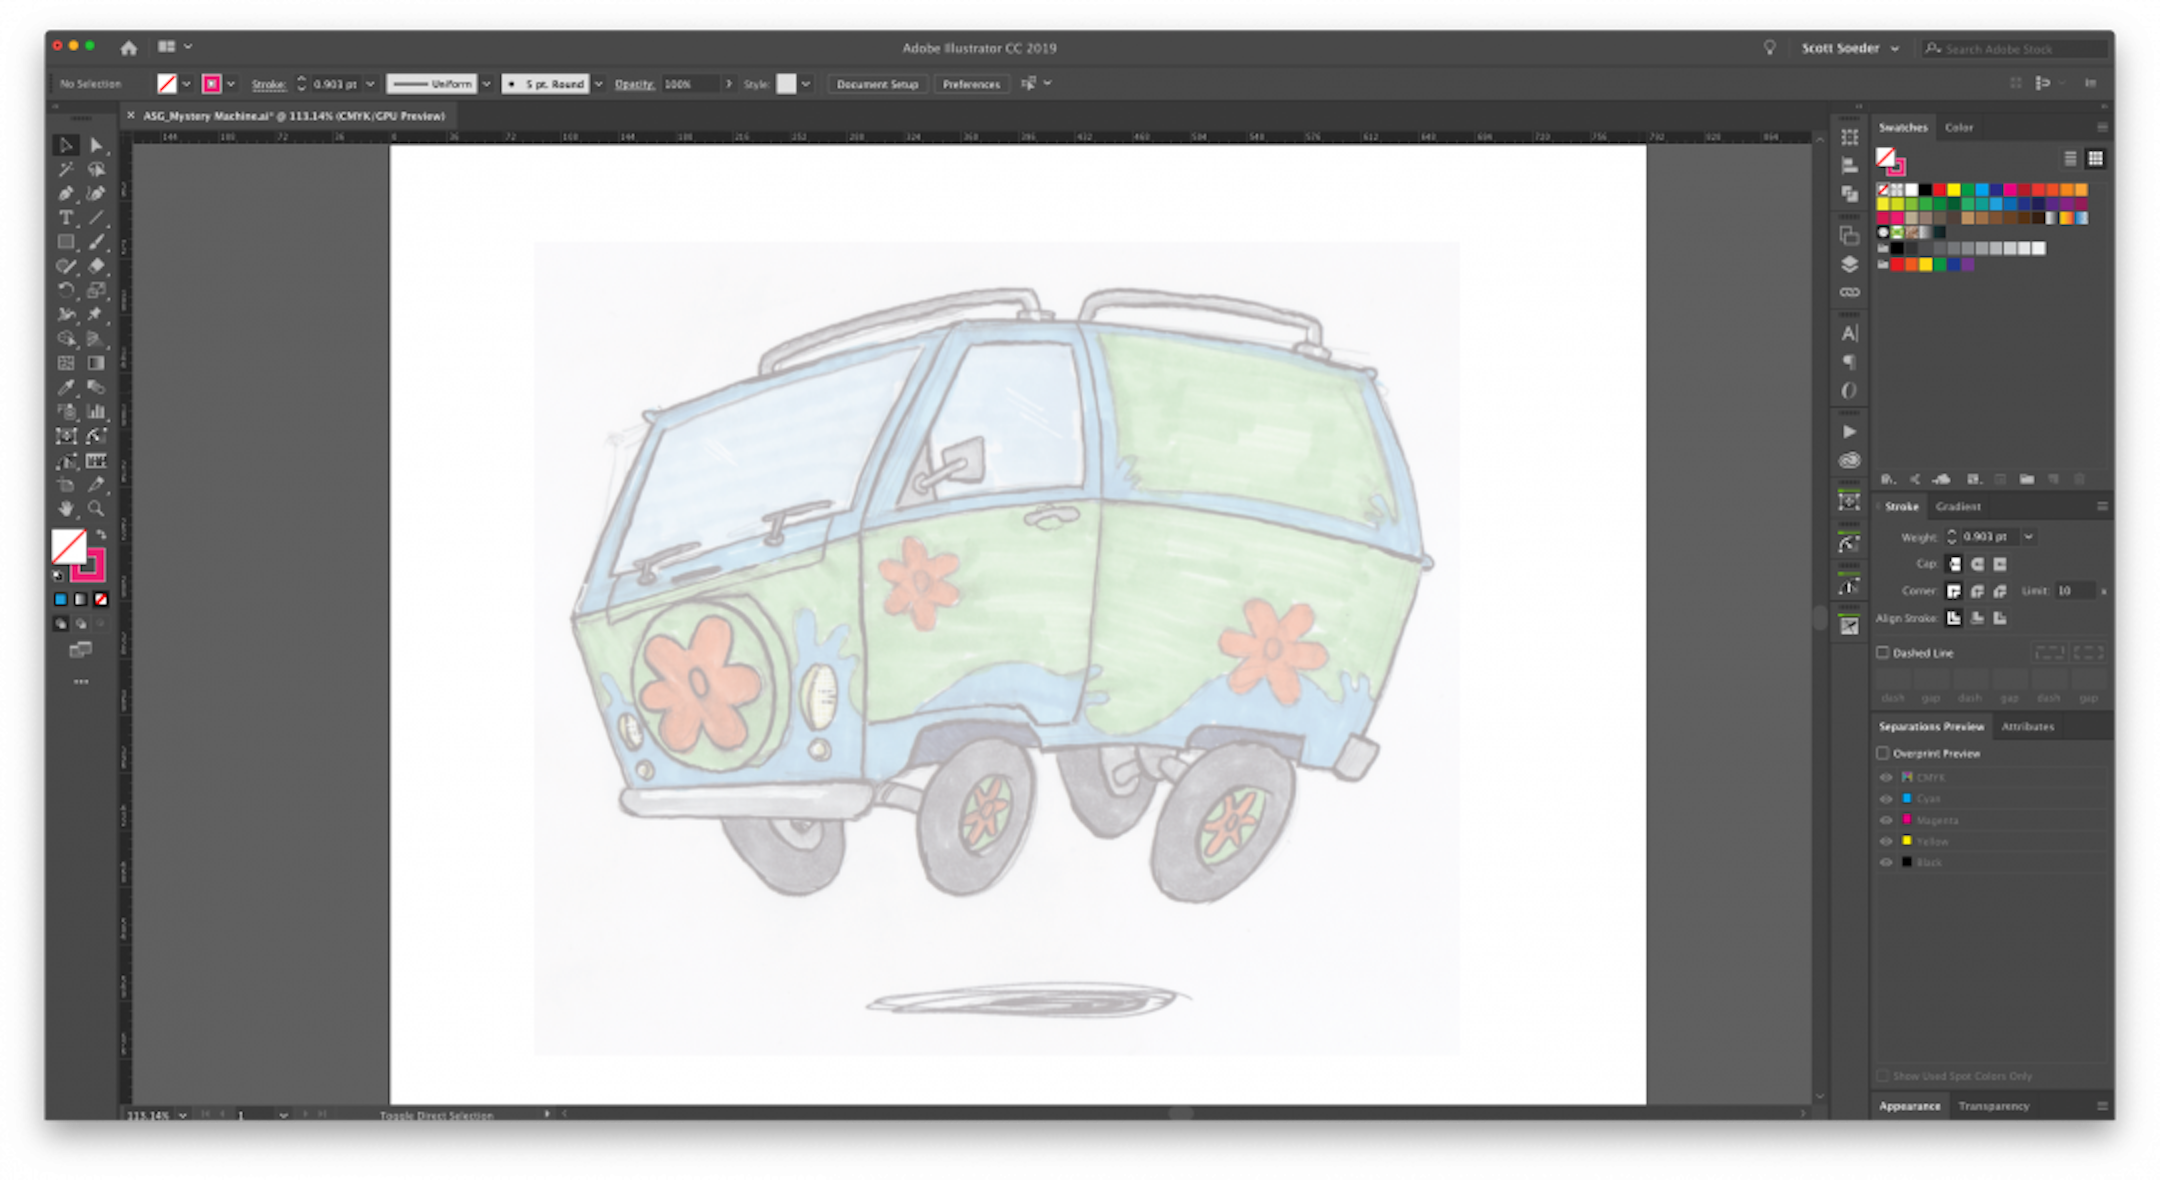 zoinks-making-a-mystery-machine-with-vectorscribe-astute-graphics